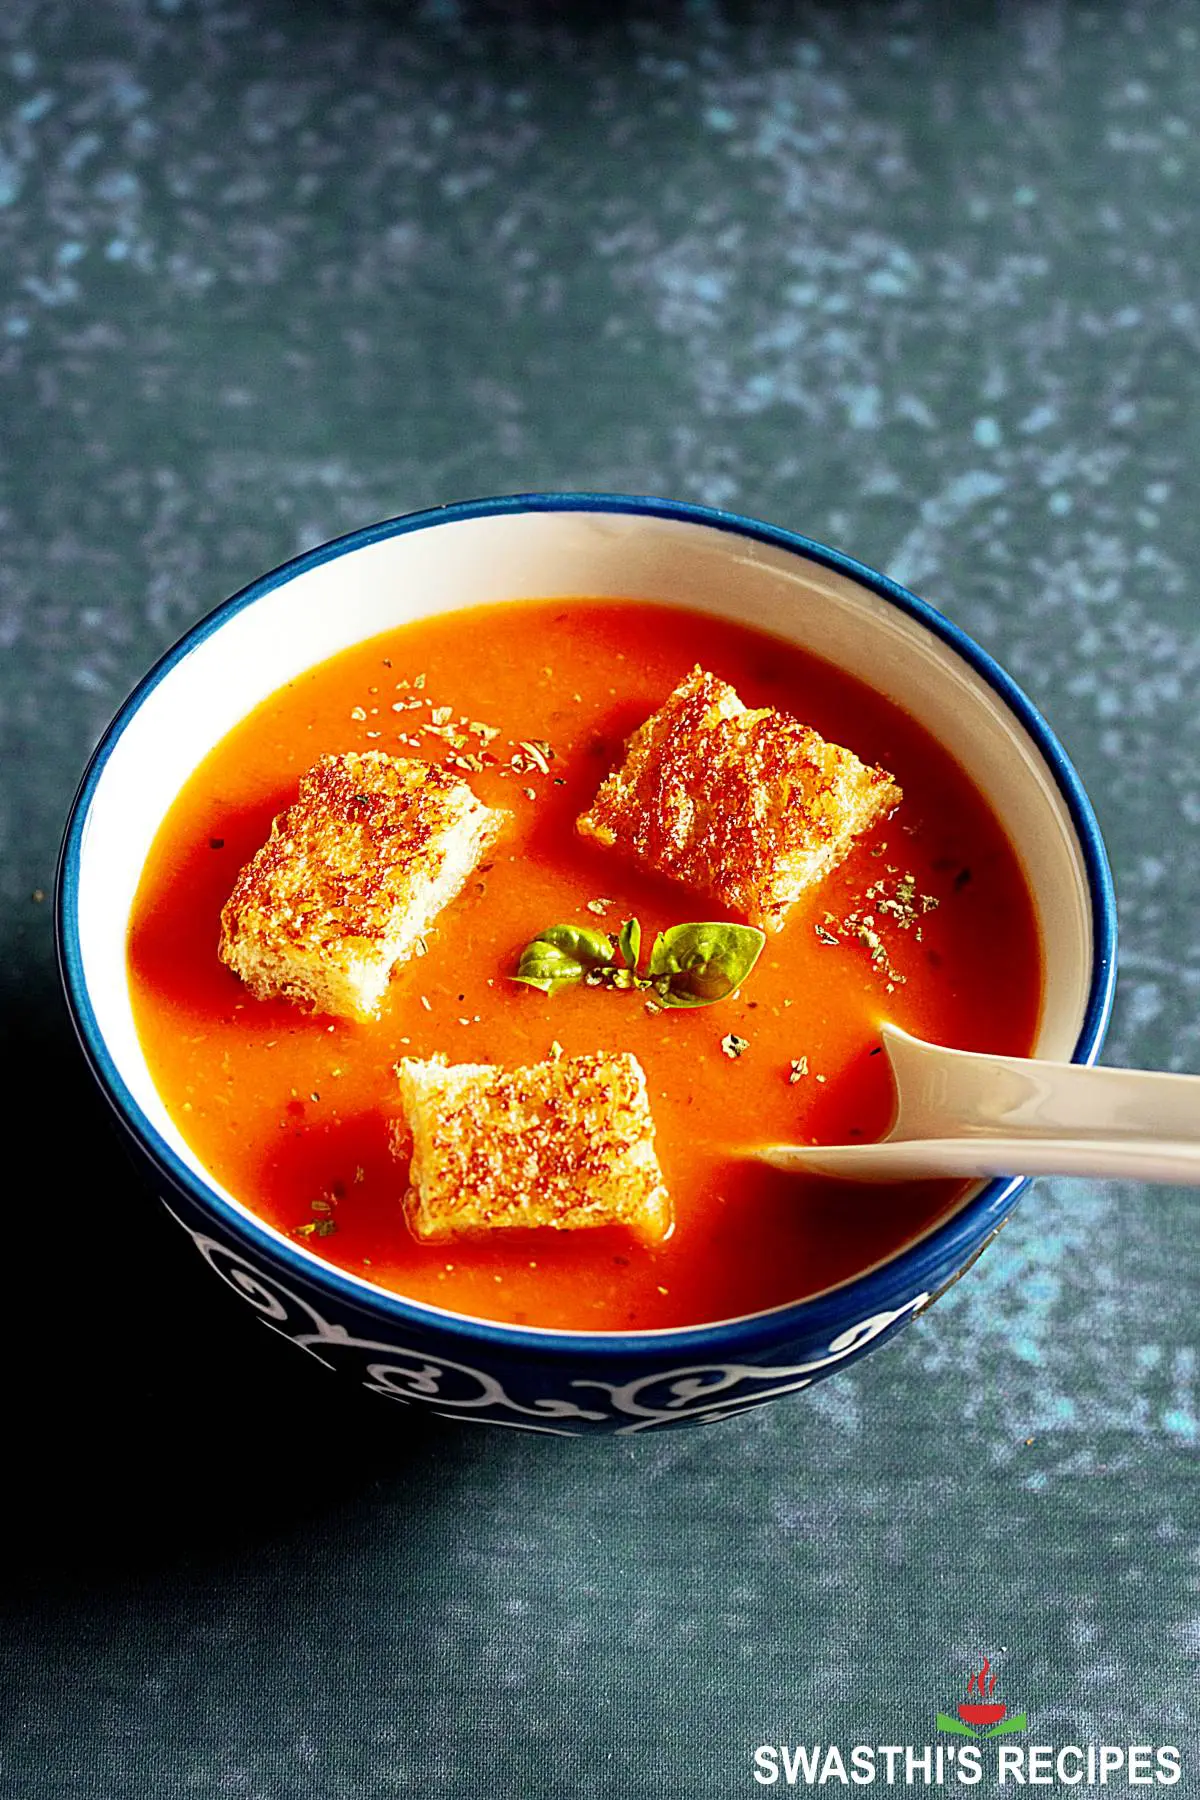 How soup became one of the most popular food items, Food